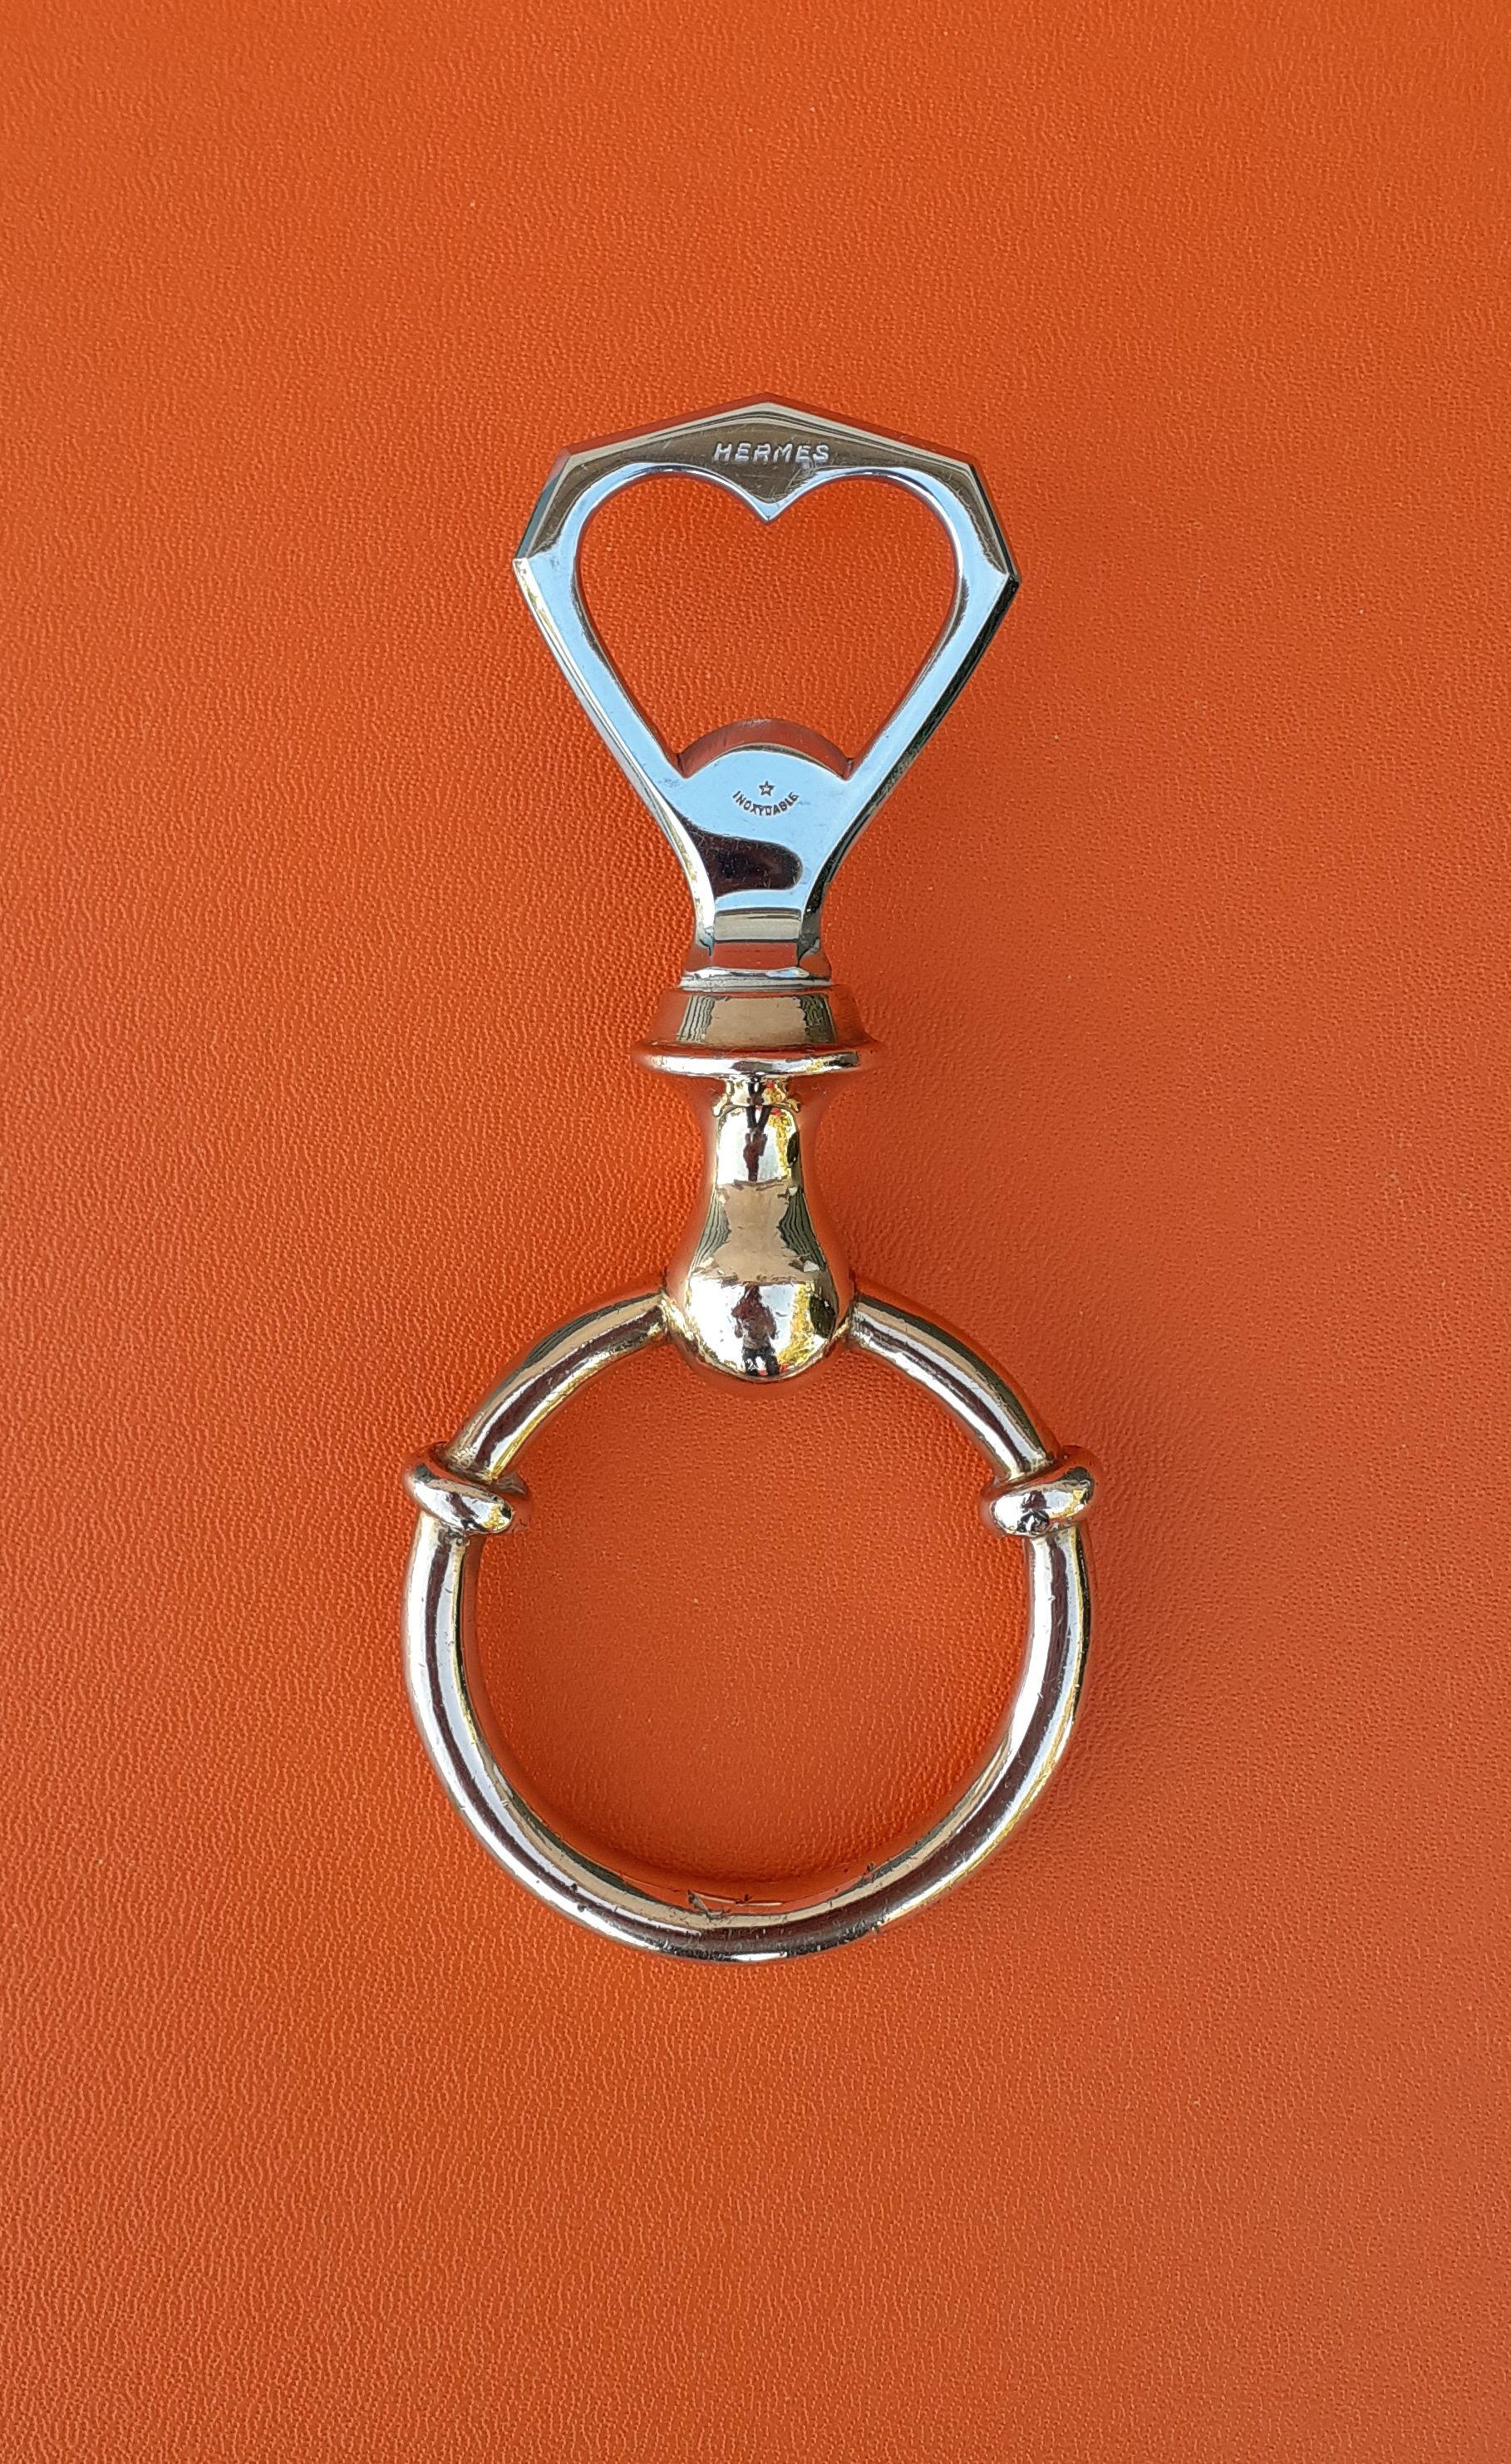 Rare and Beautiful Authentic Hermès Bottle Opener

In shape of a horse bit

Made in France

Made of silvery and golden non-precious stainless metal

